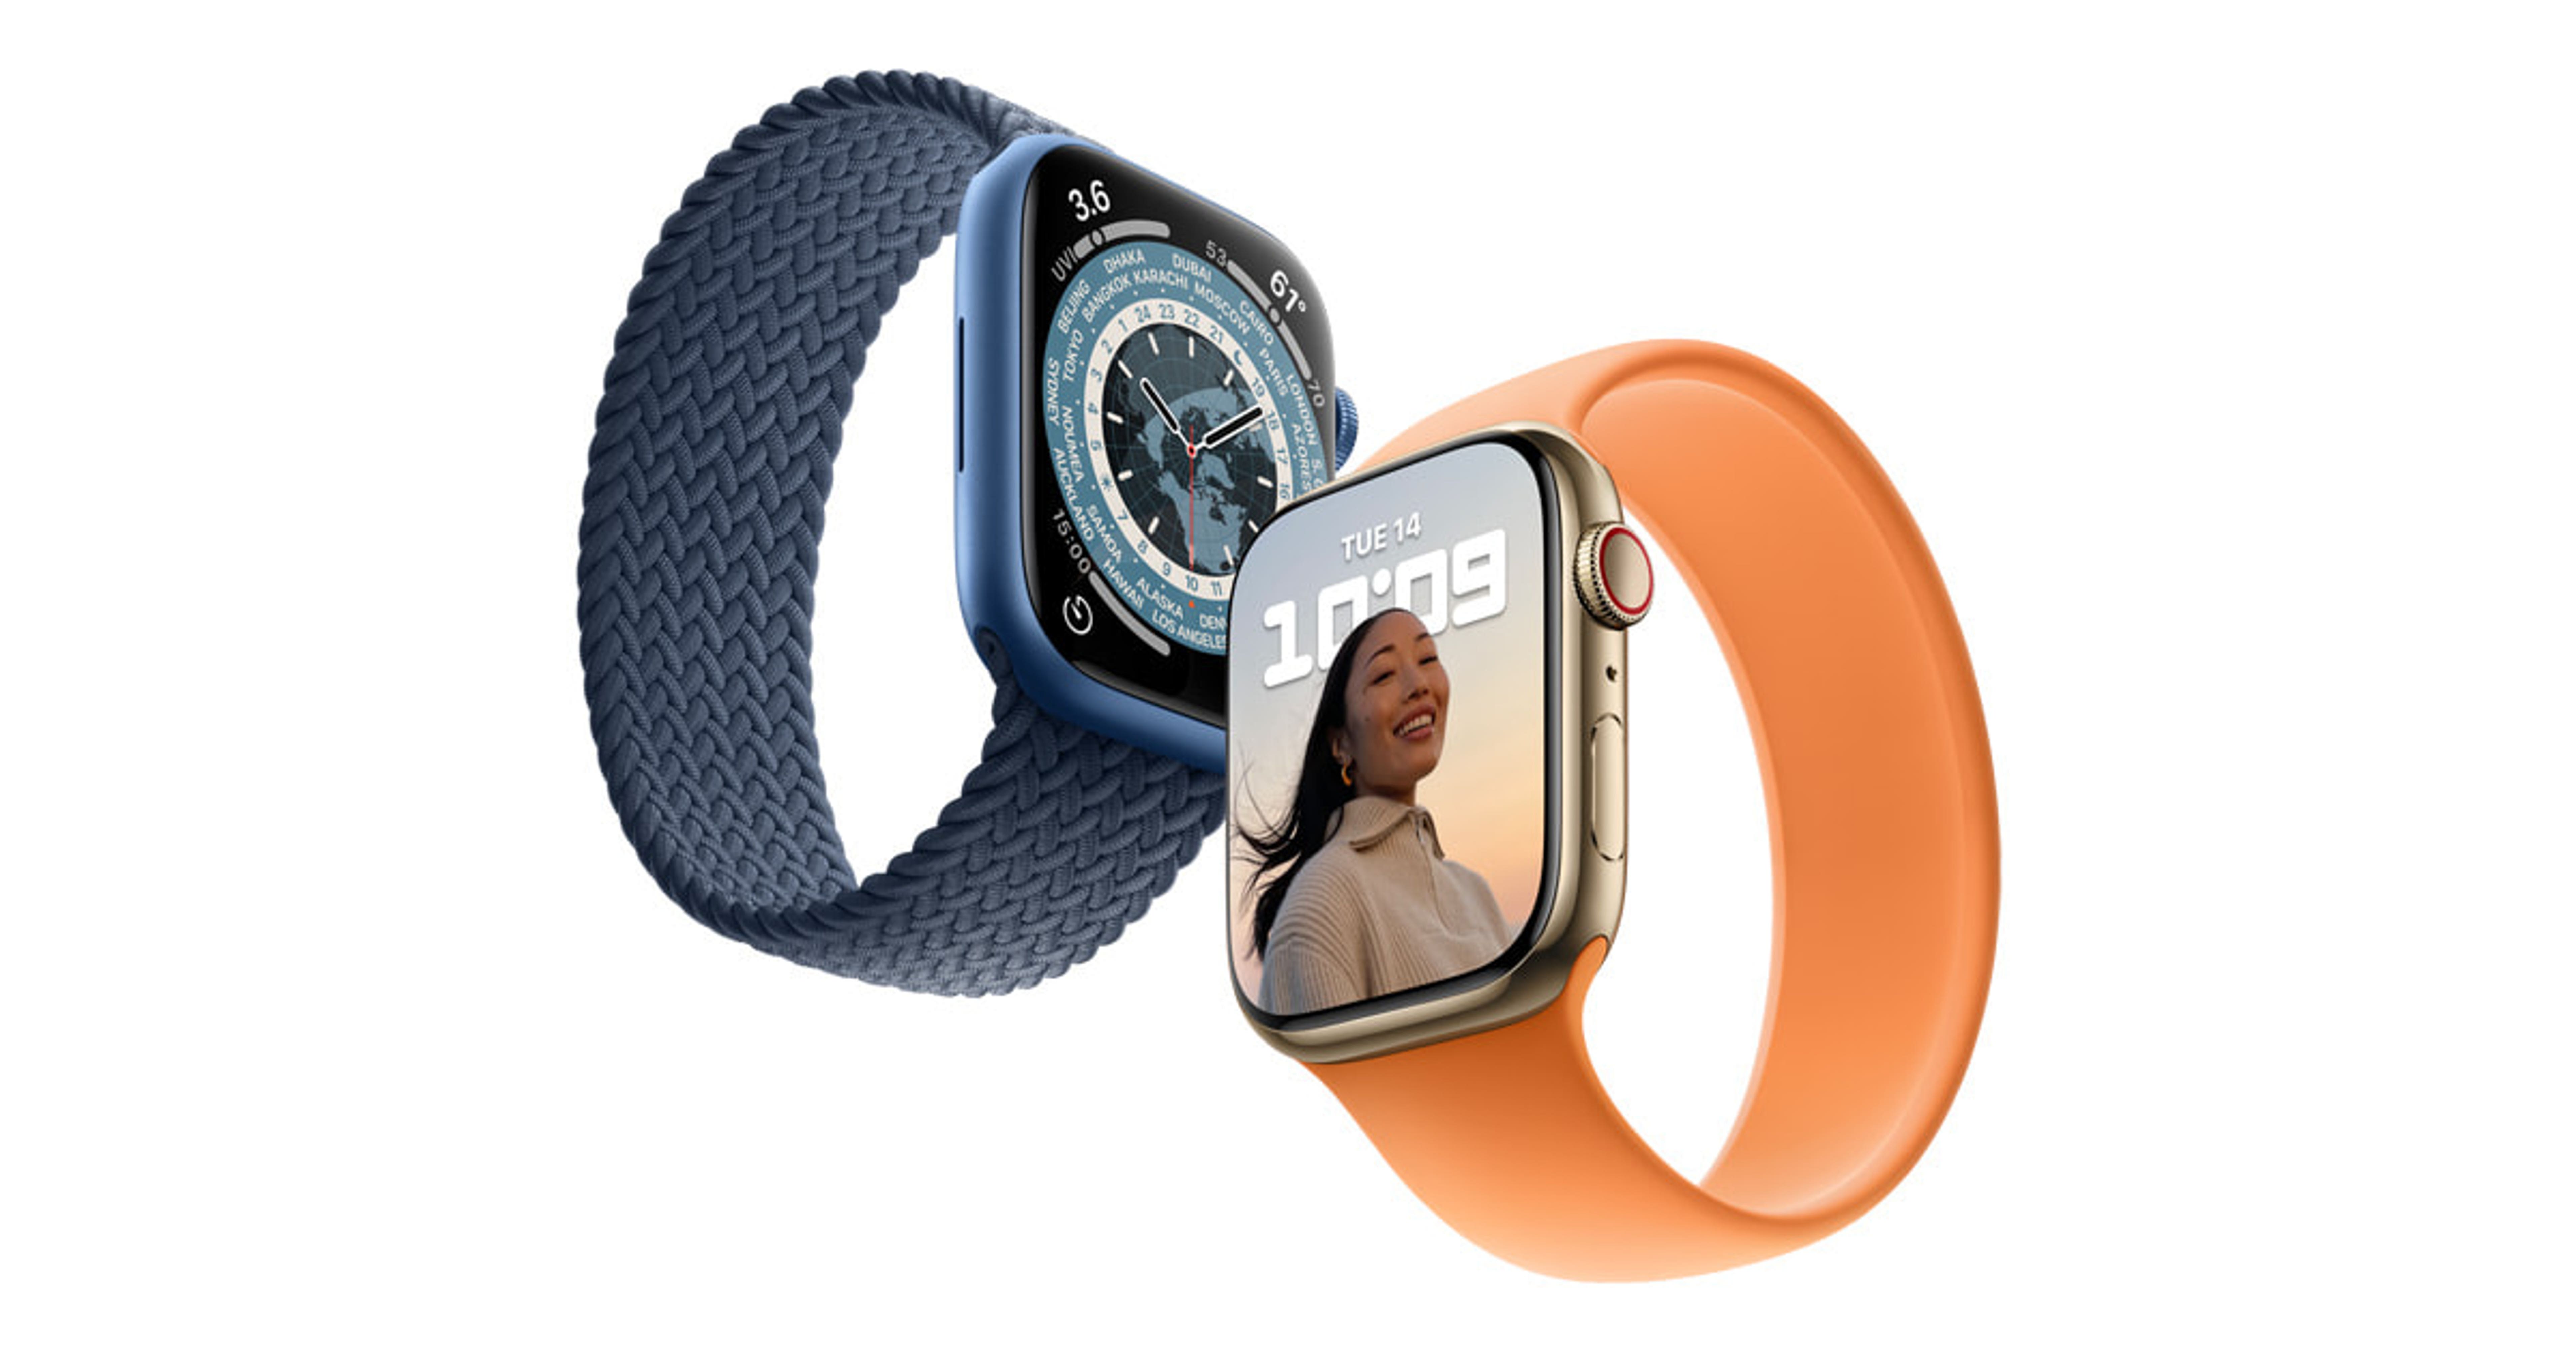 Eagerly Waiting For Apple Watch 8? Why It May Not Be Worth An Upgrade From Series 6 Or 7